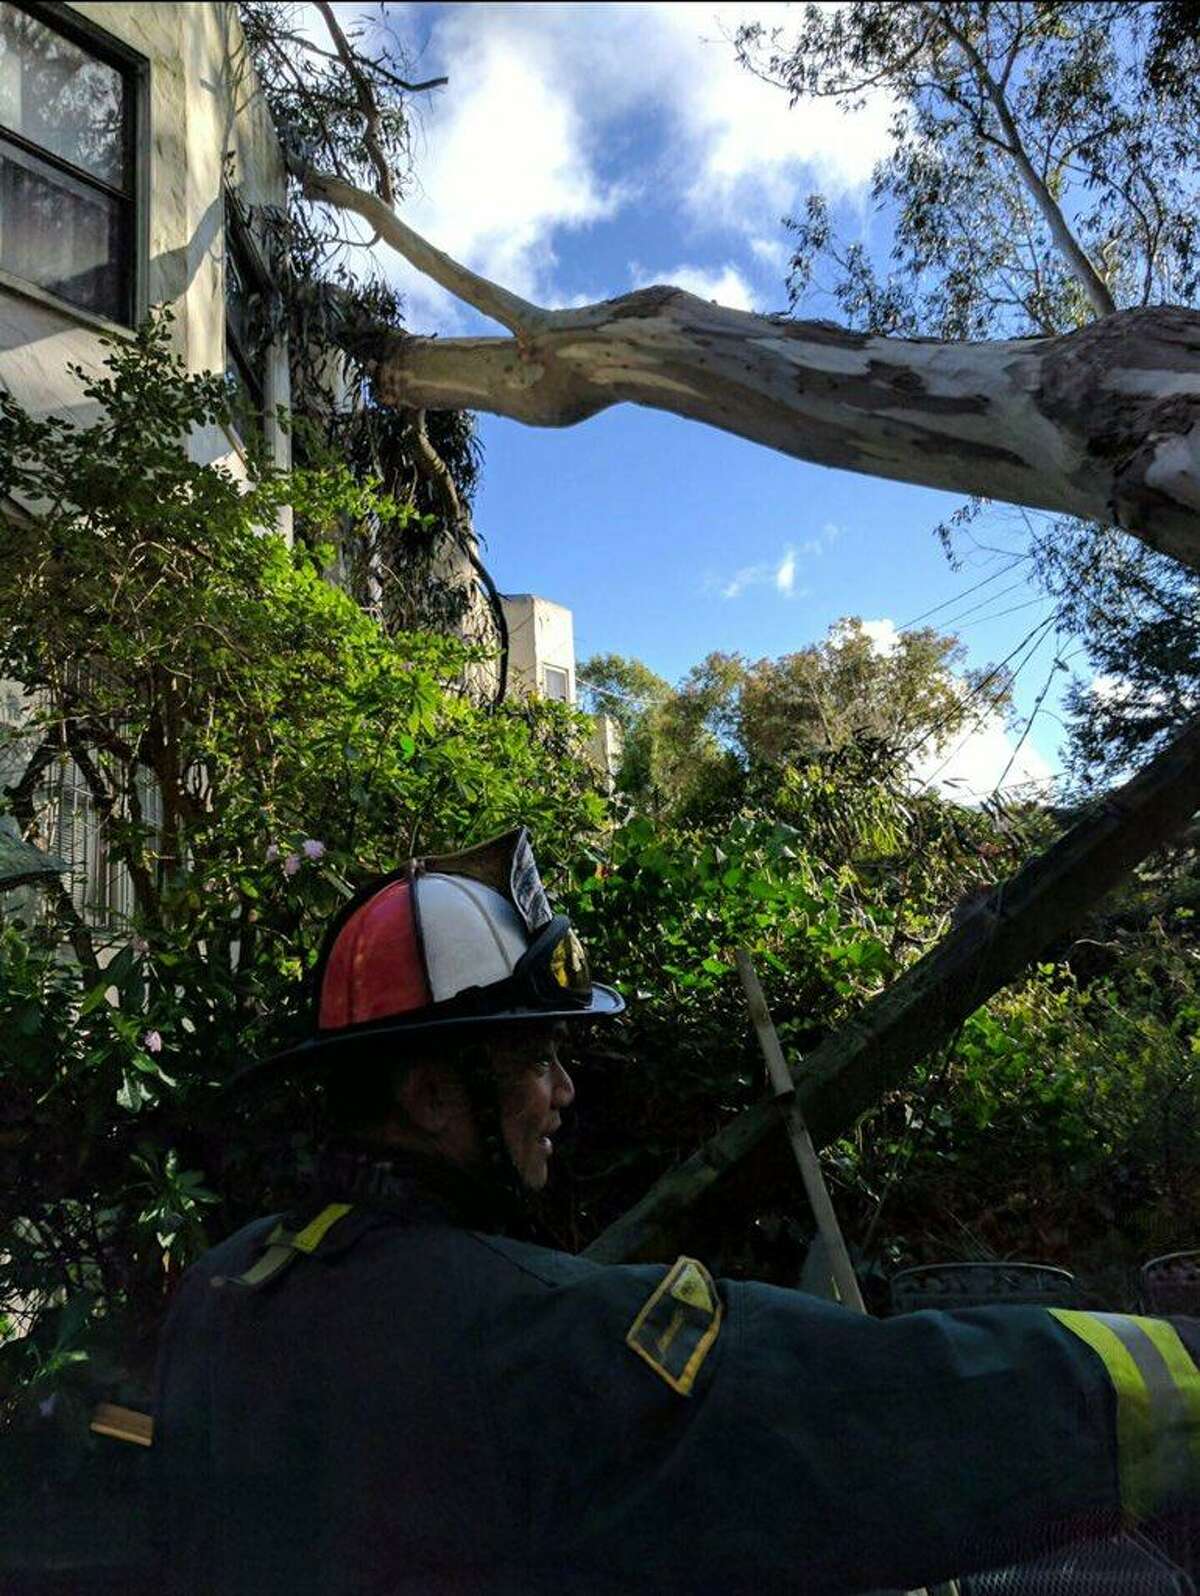 The San Francisco Fire Department responded when a 100-foot tree fell on a house in West Portal on Wednesday.